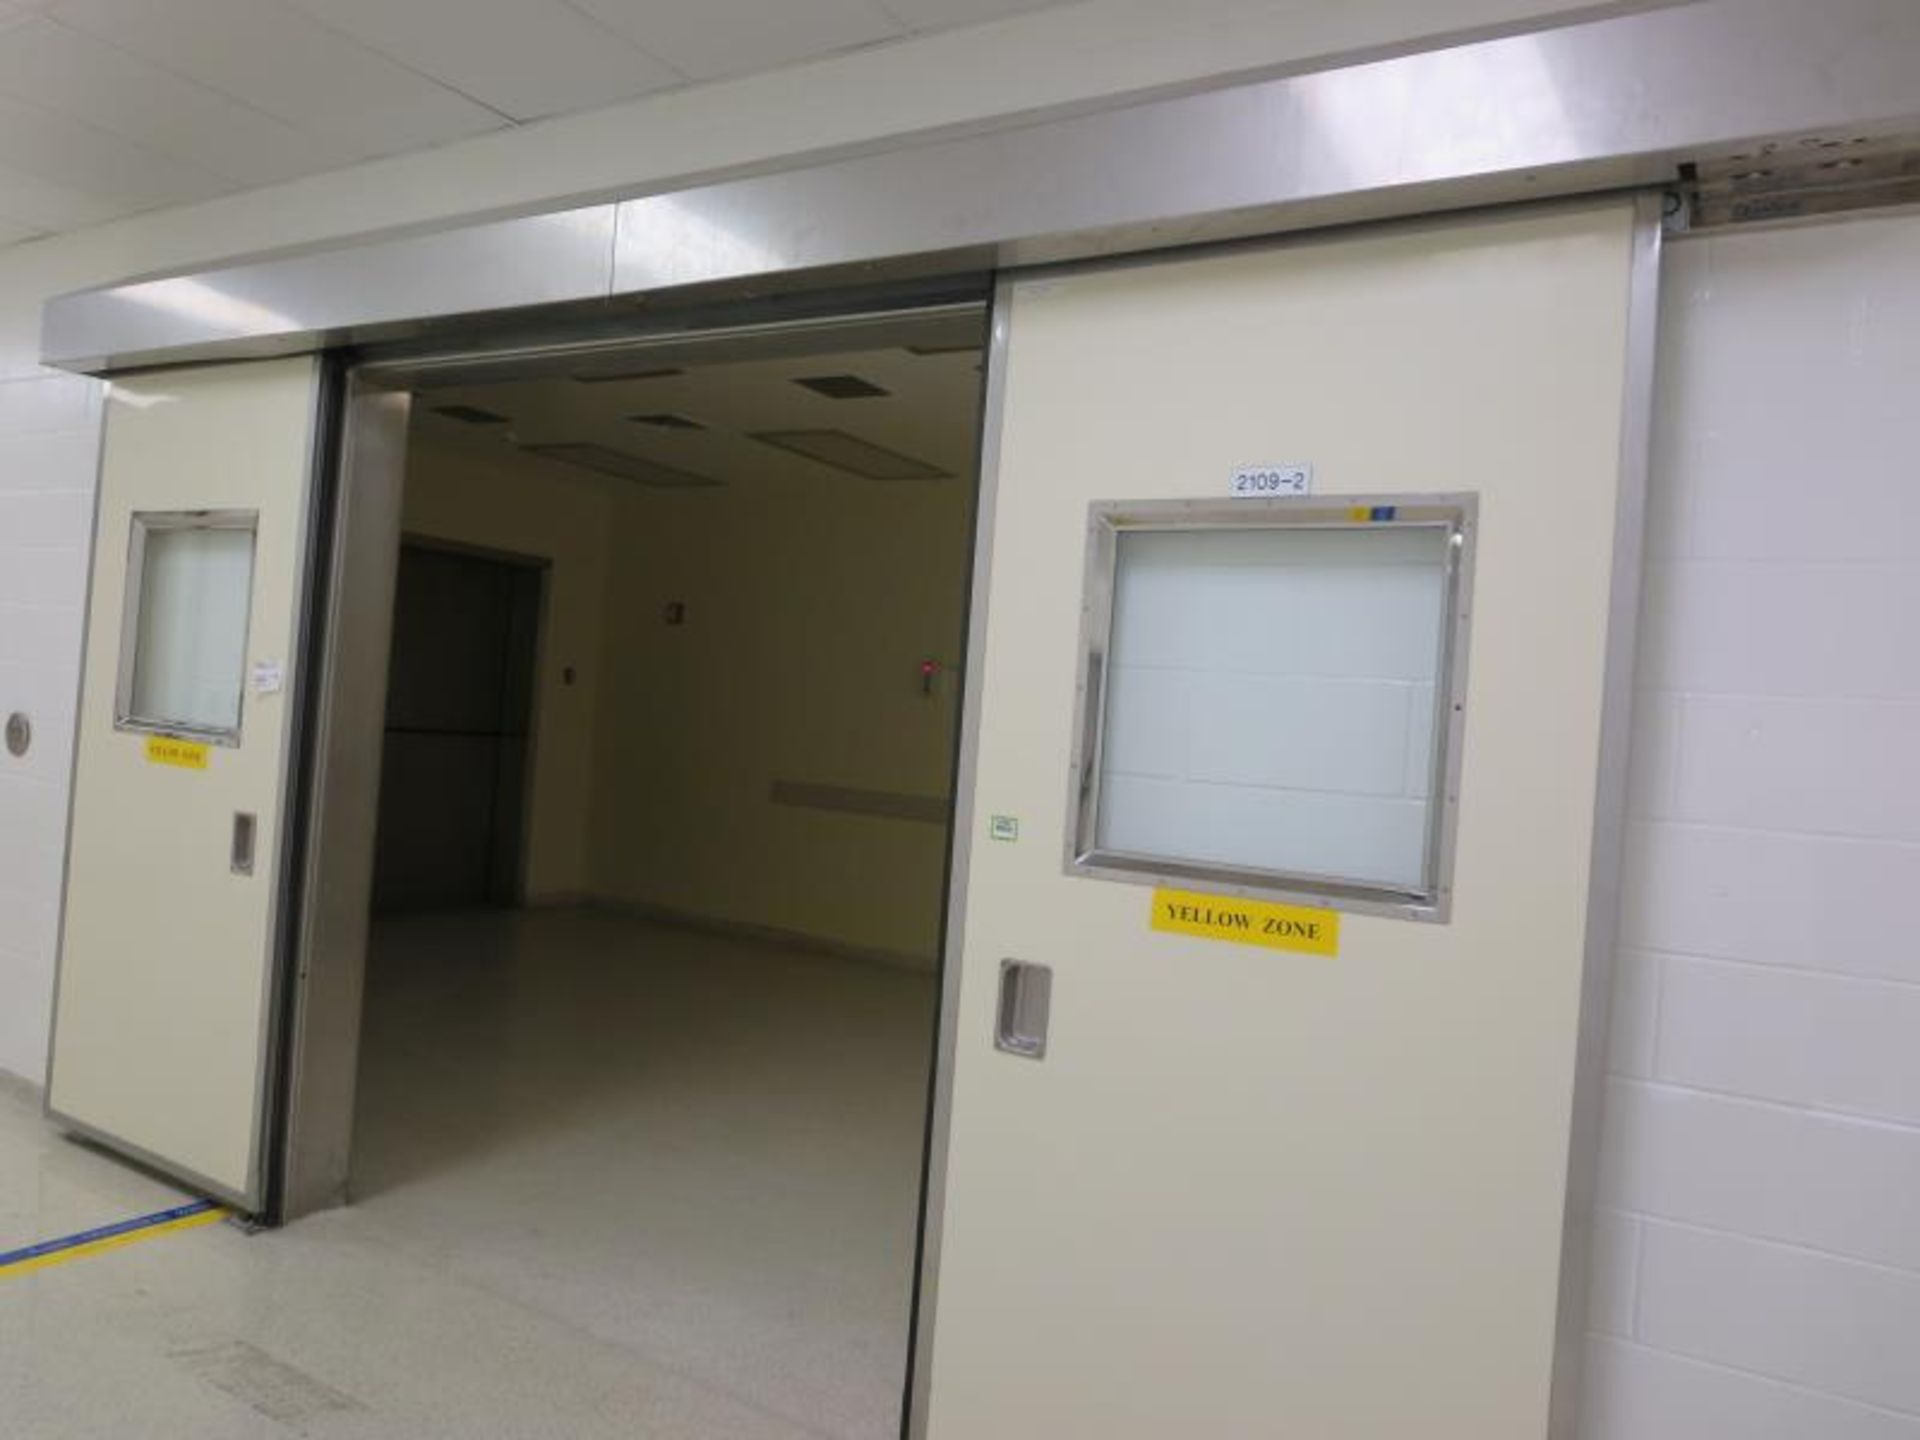 Cleanseal Automatic Double Sliding Door; 92"w x 99" h. Controlled Environment Doors. HIT# 2226007.